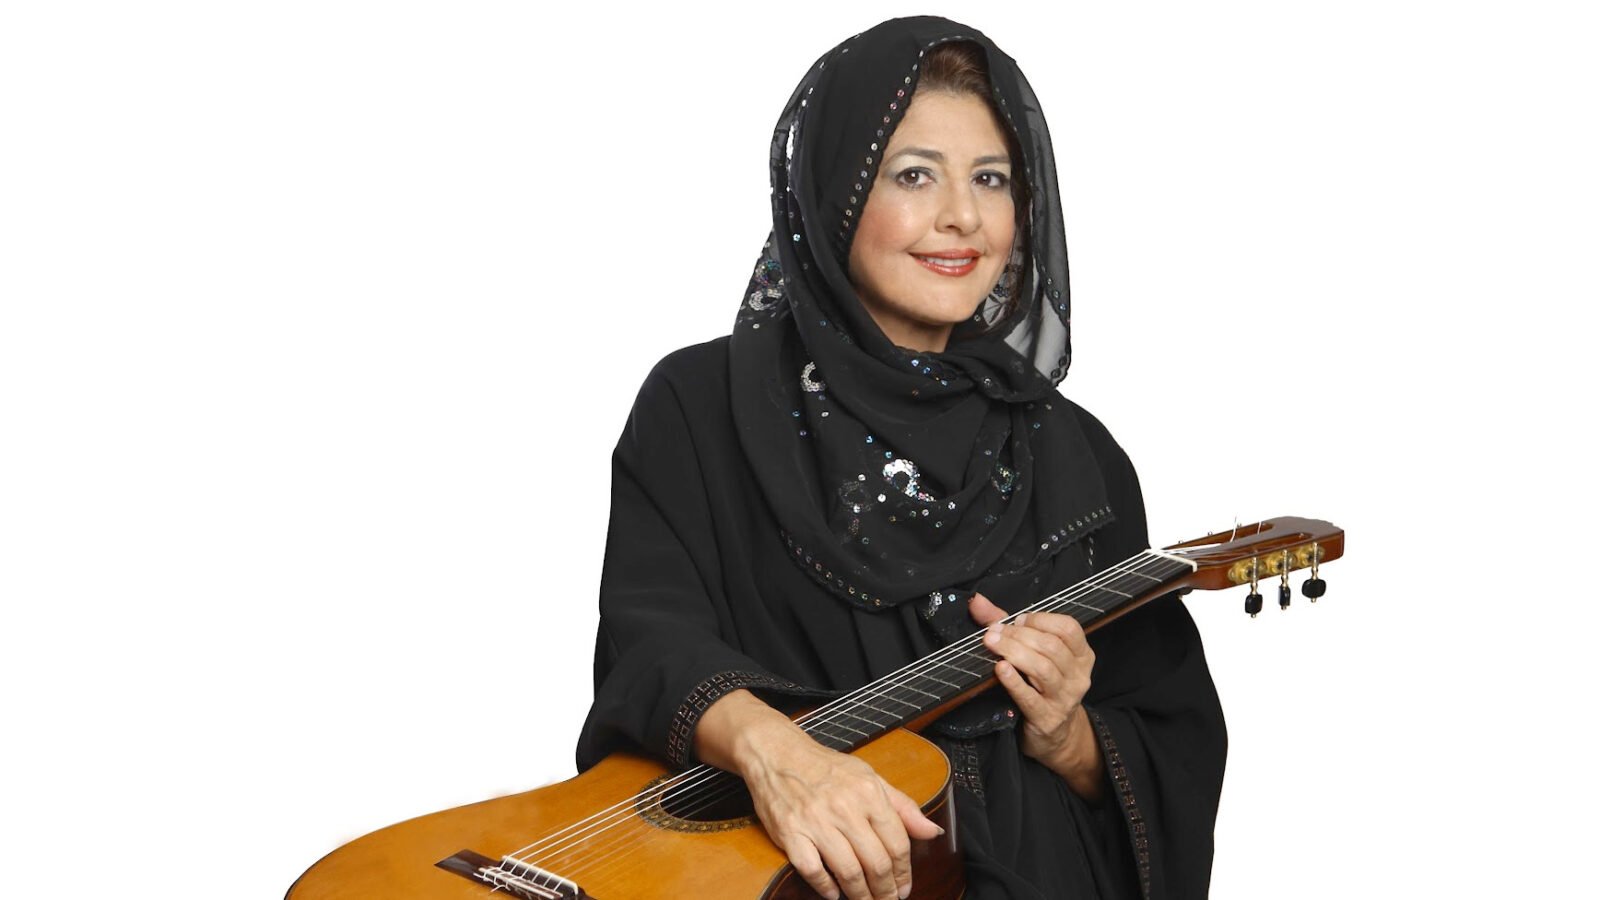 Lily Afshar, in a traditional black veil and dress, smiles with a guitar